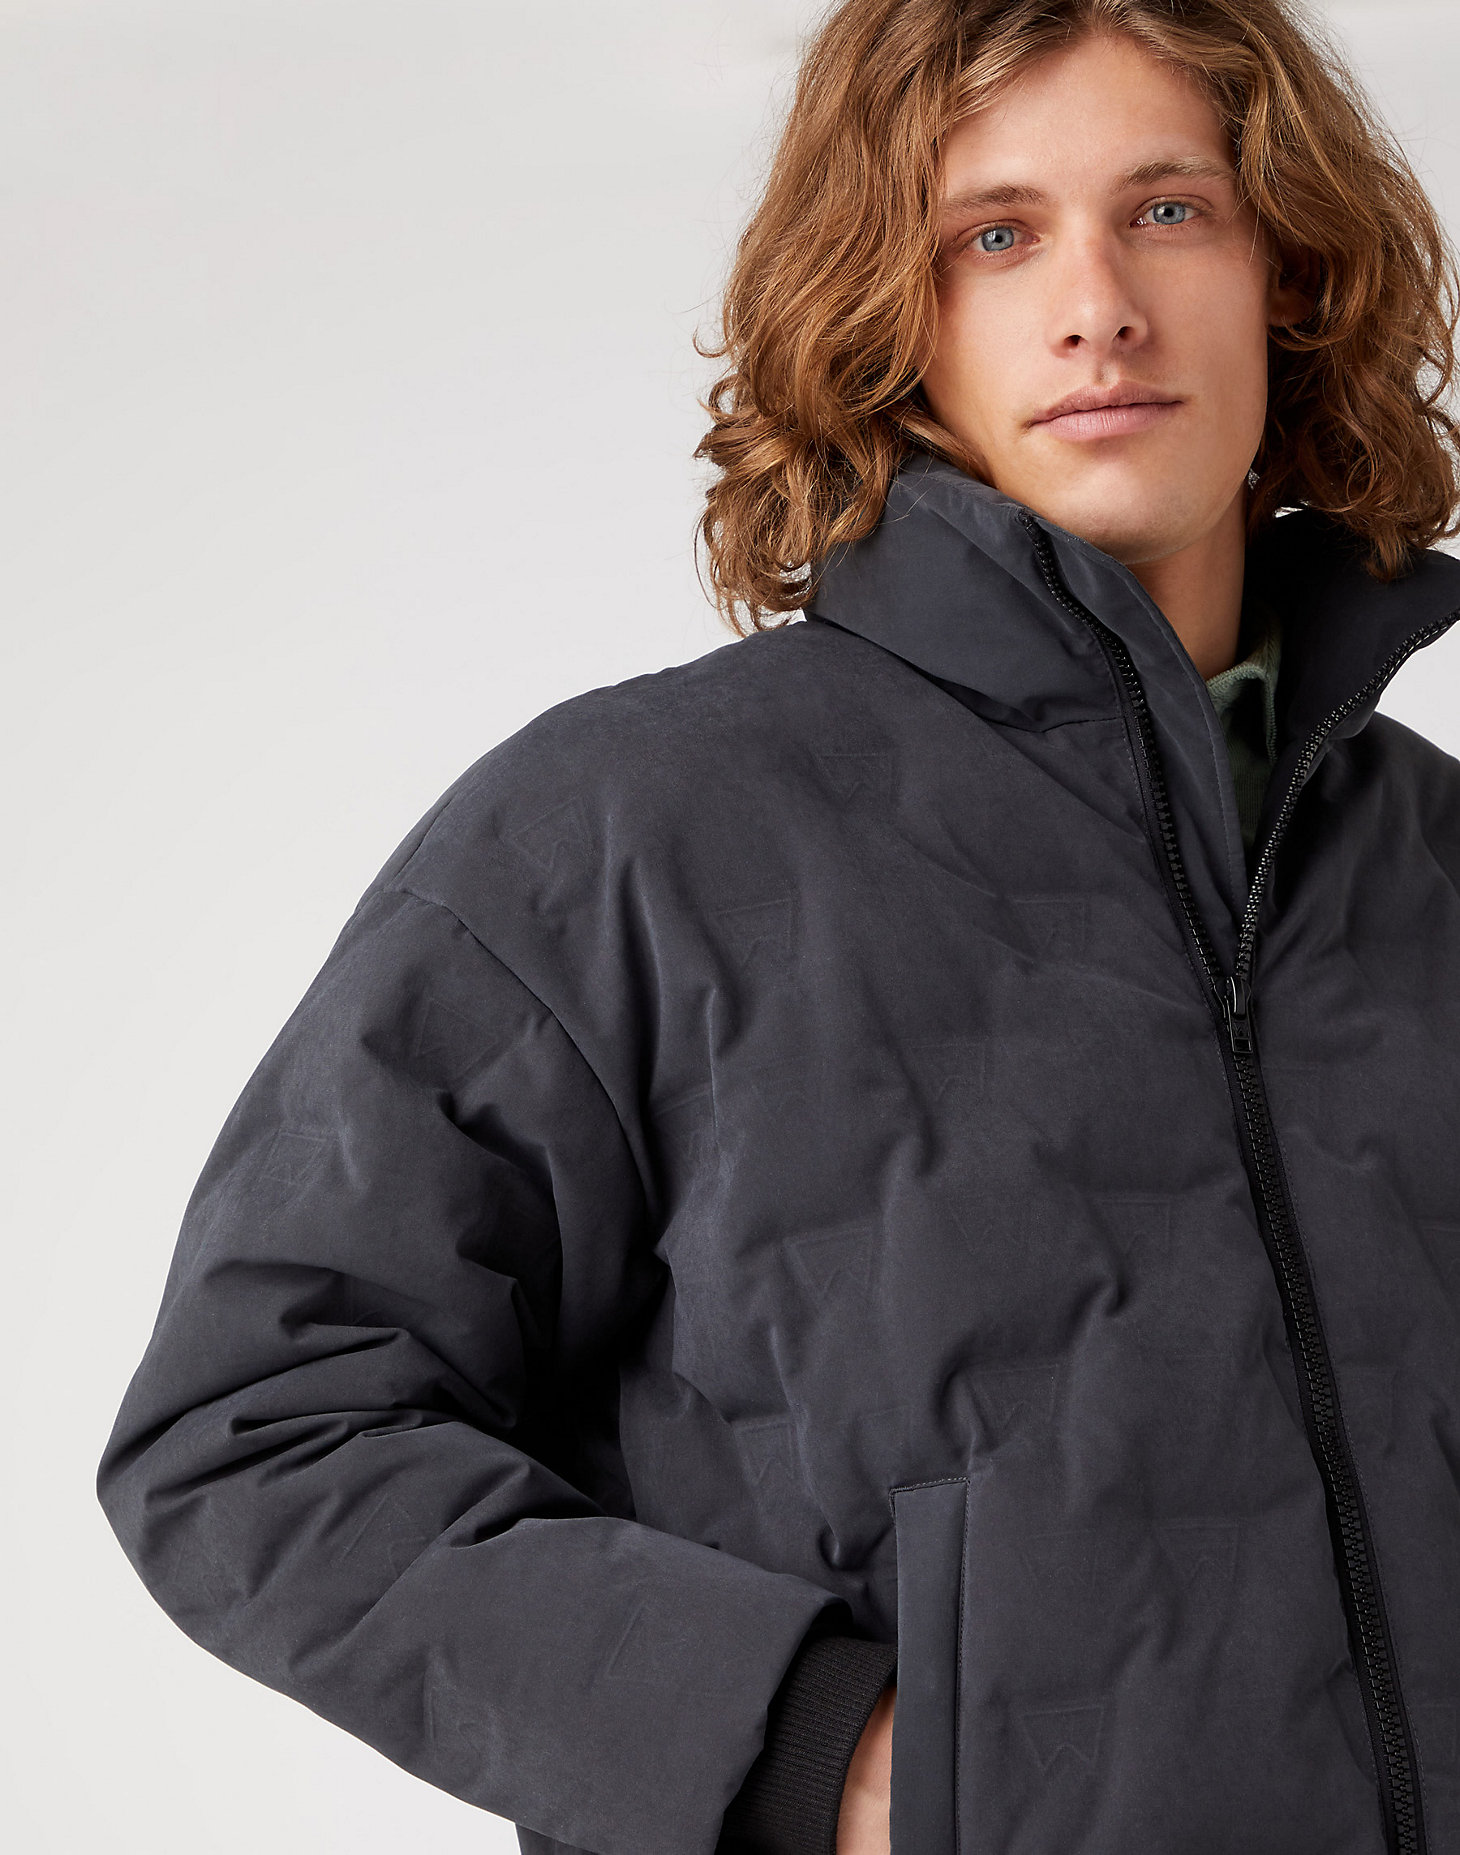 Brand Down Puffer in Faded Black alternative view 3